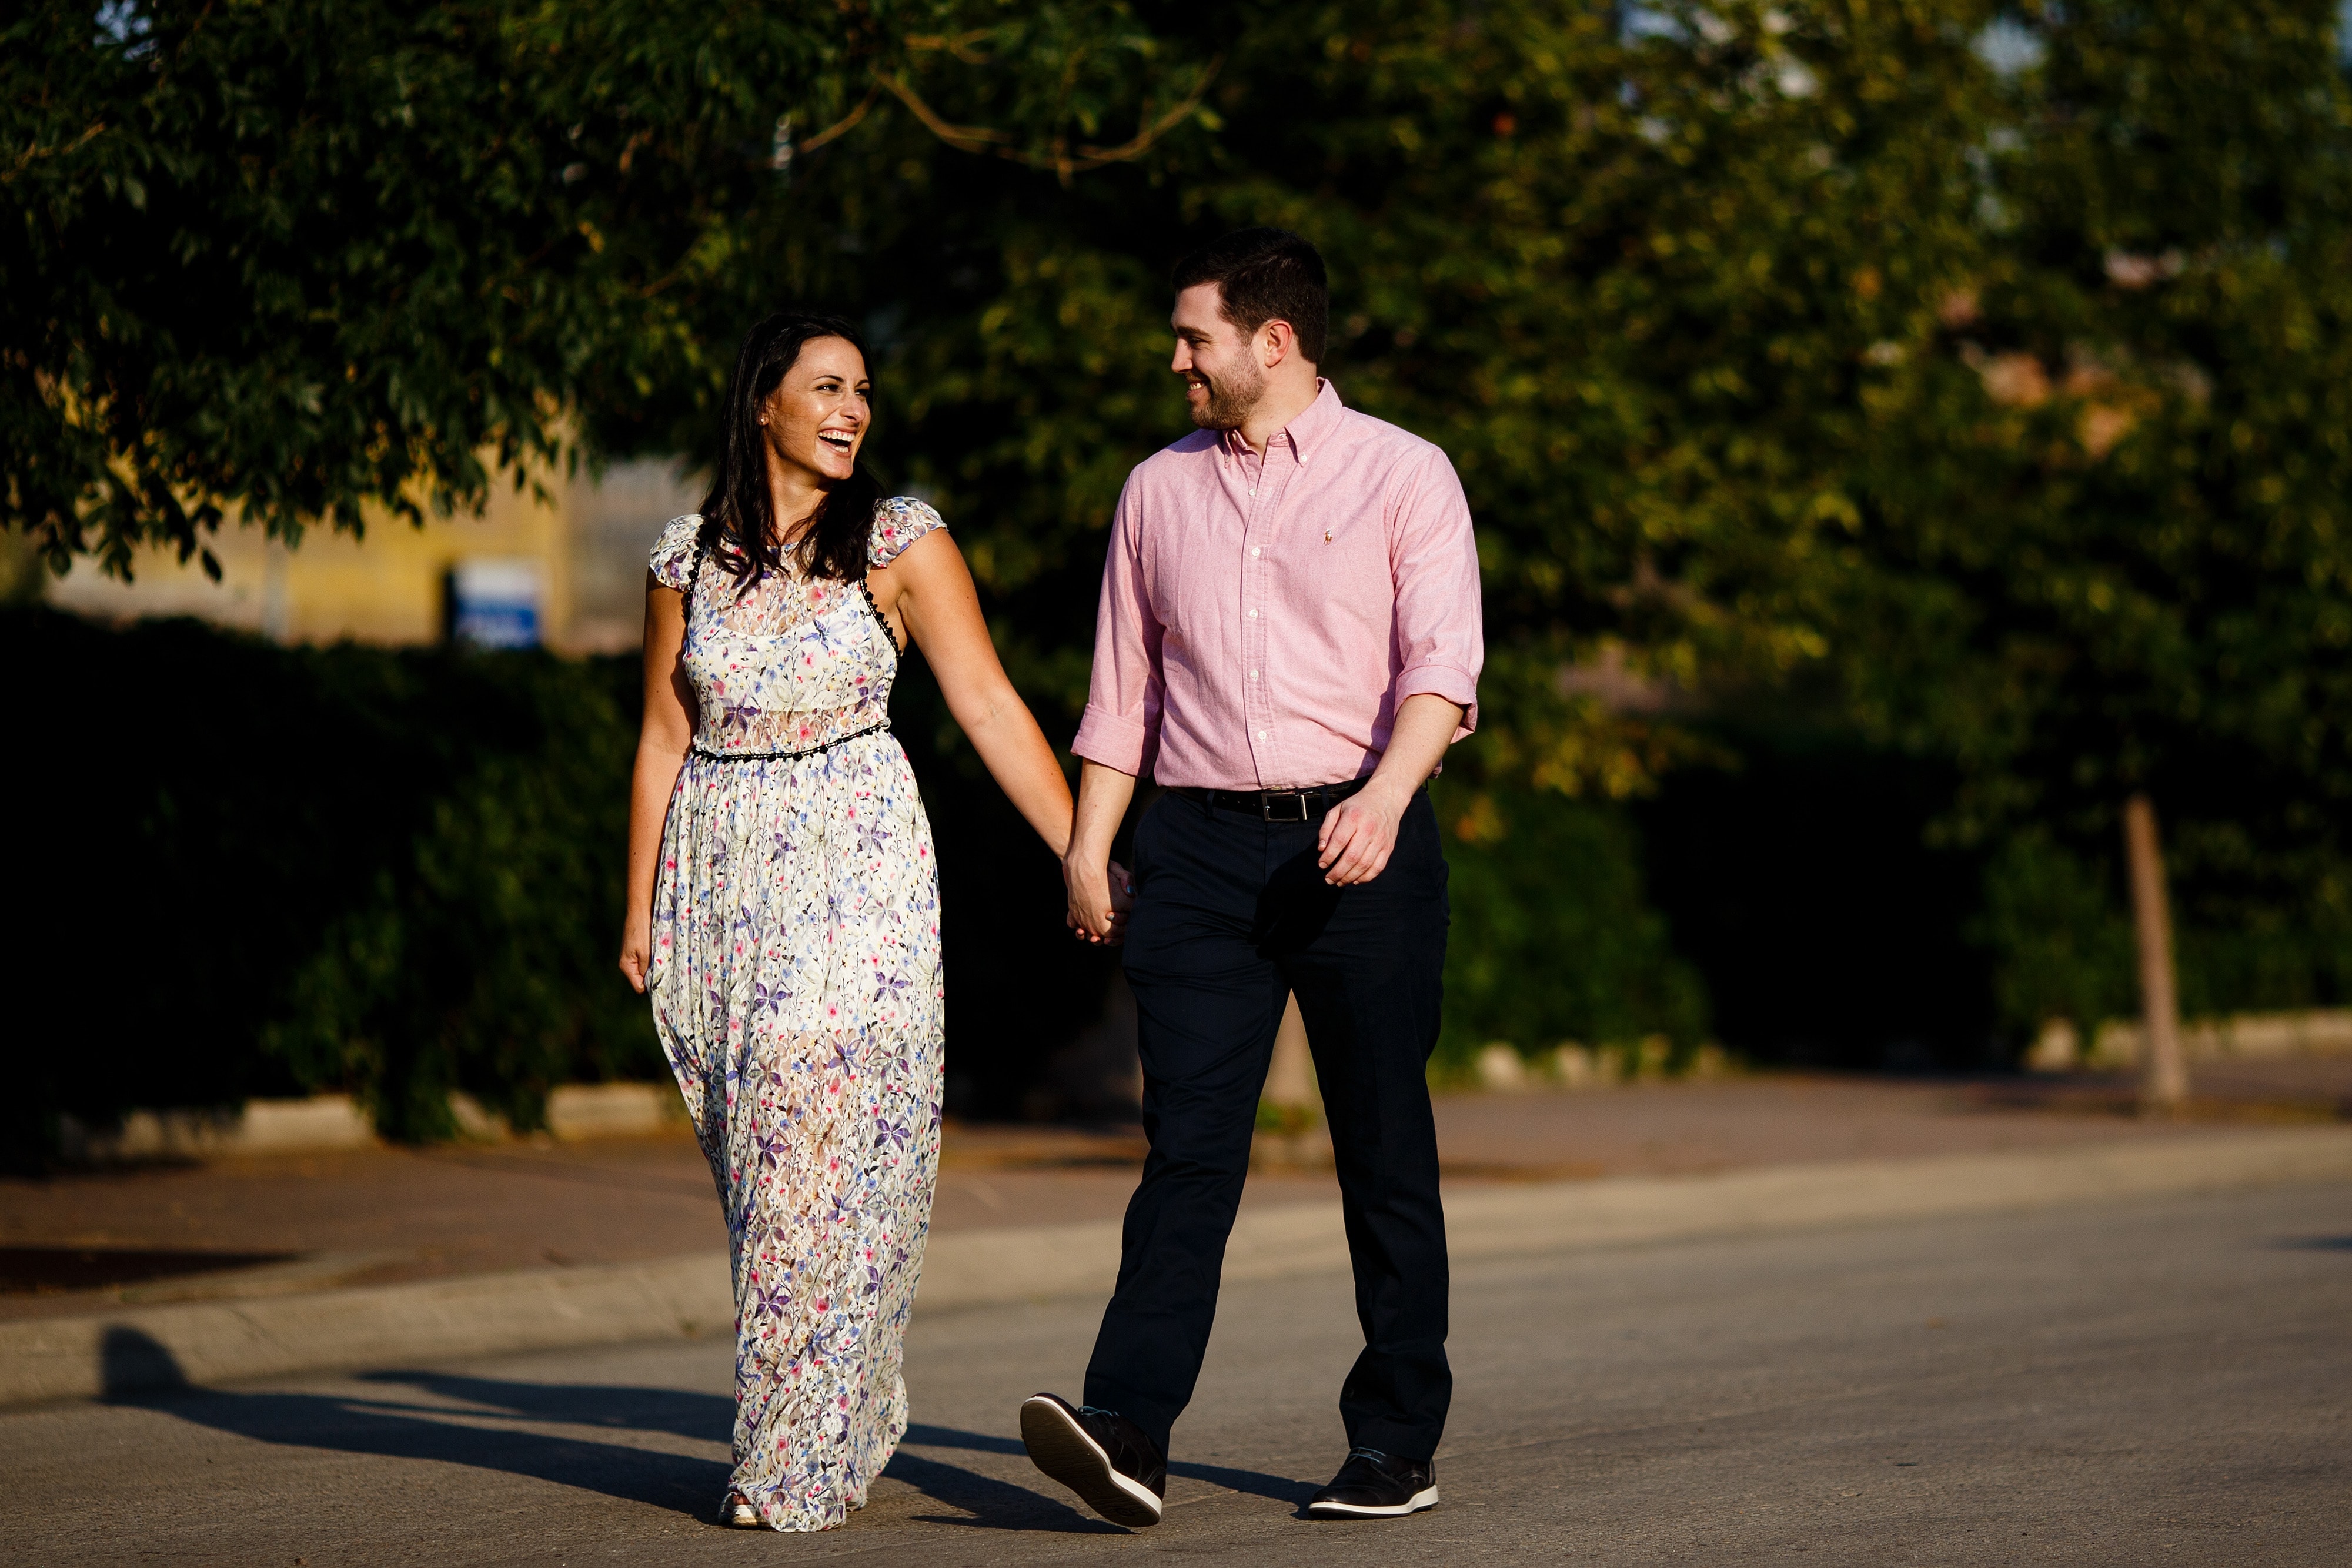 Danielle and Jordan walk together in lower downtown Denver during their engagement photos